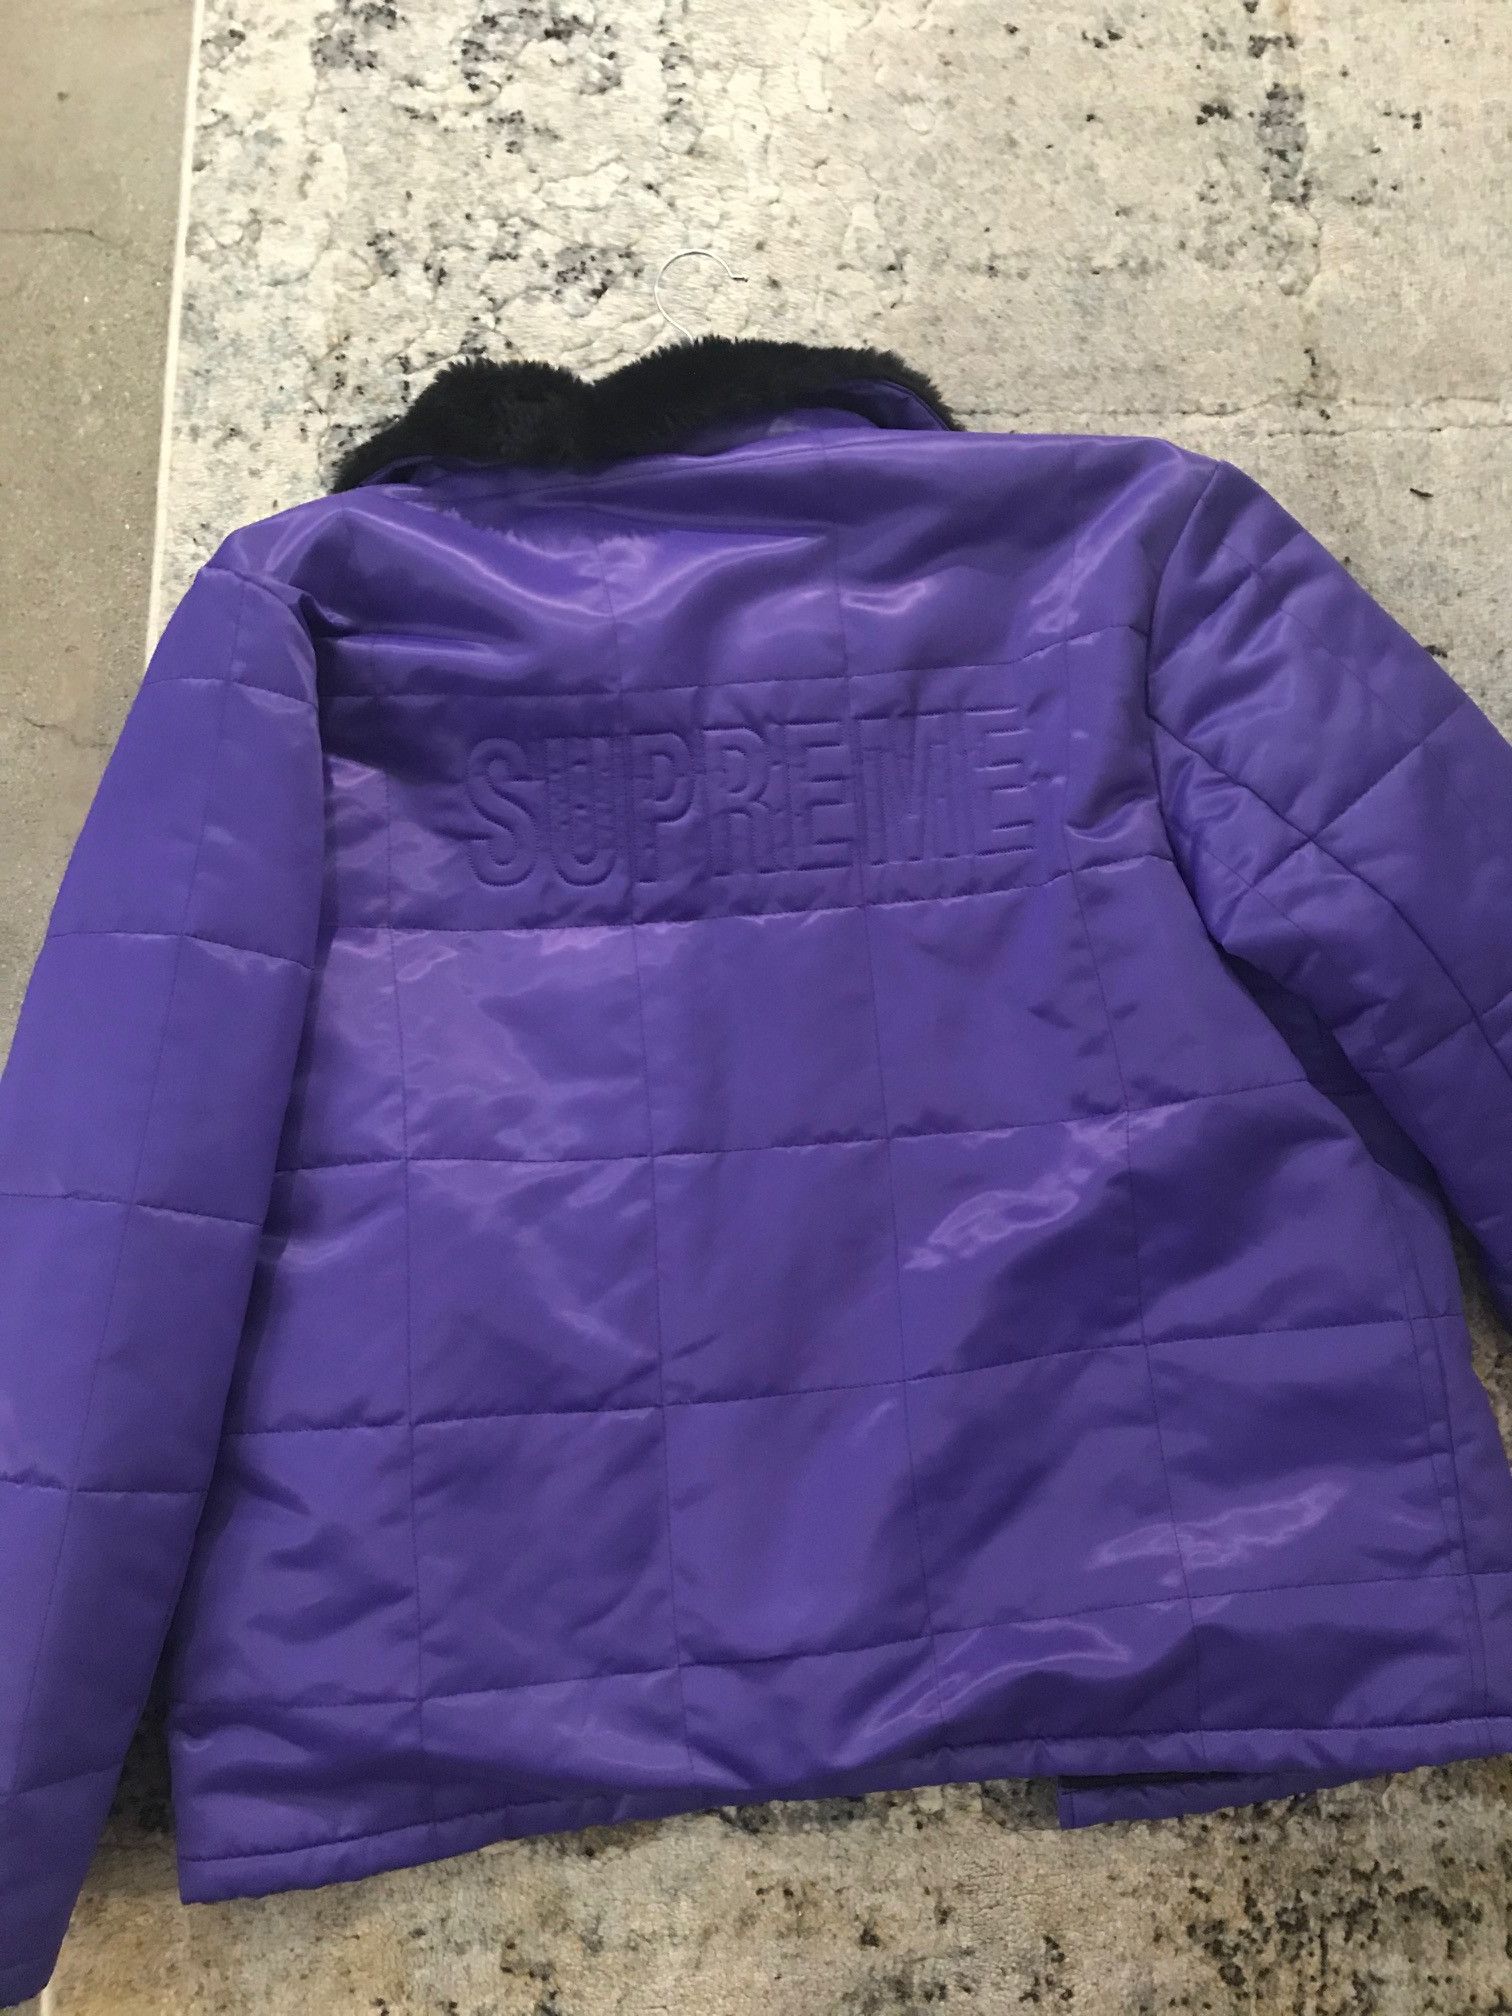 Supreme Supreme quilted cordura lined jacket | Grailed